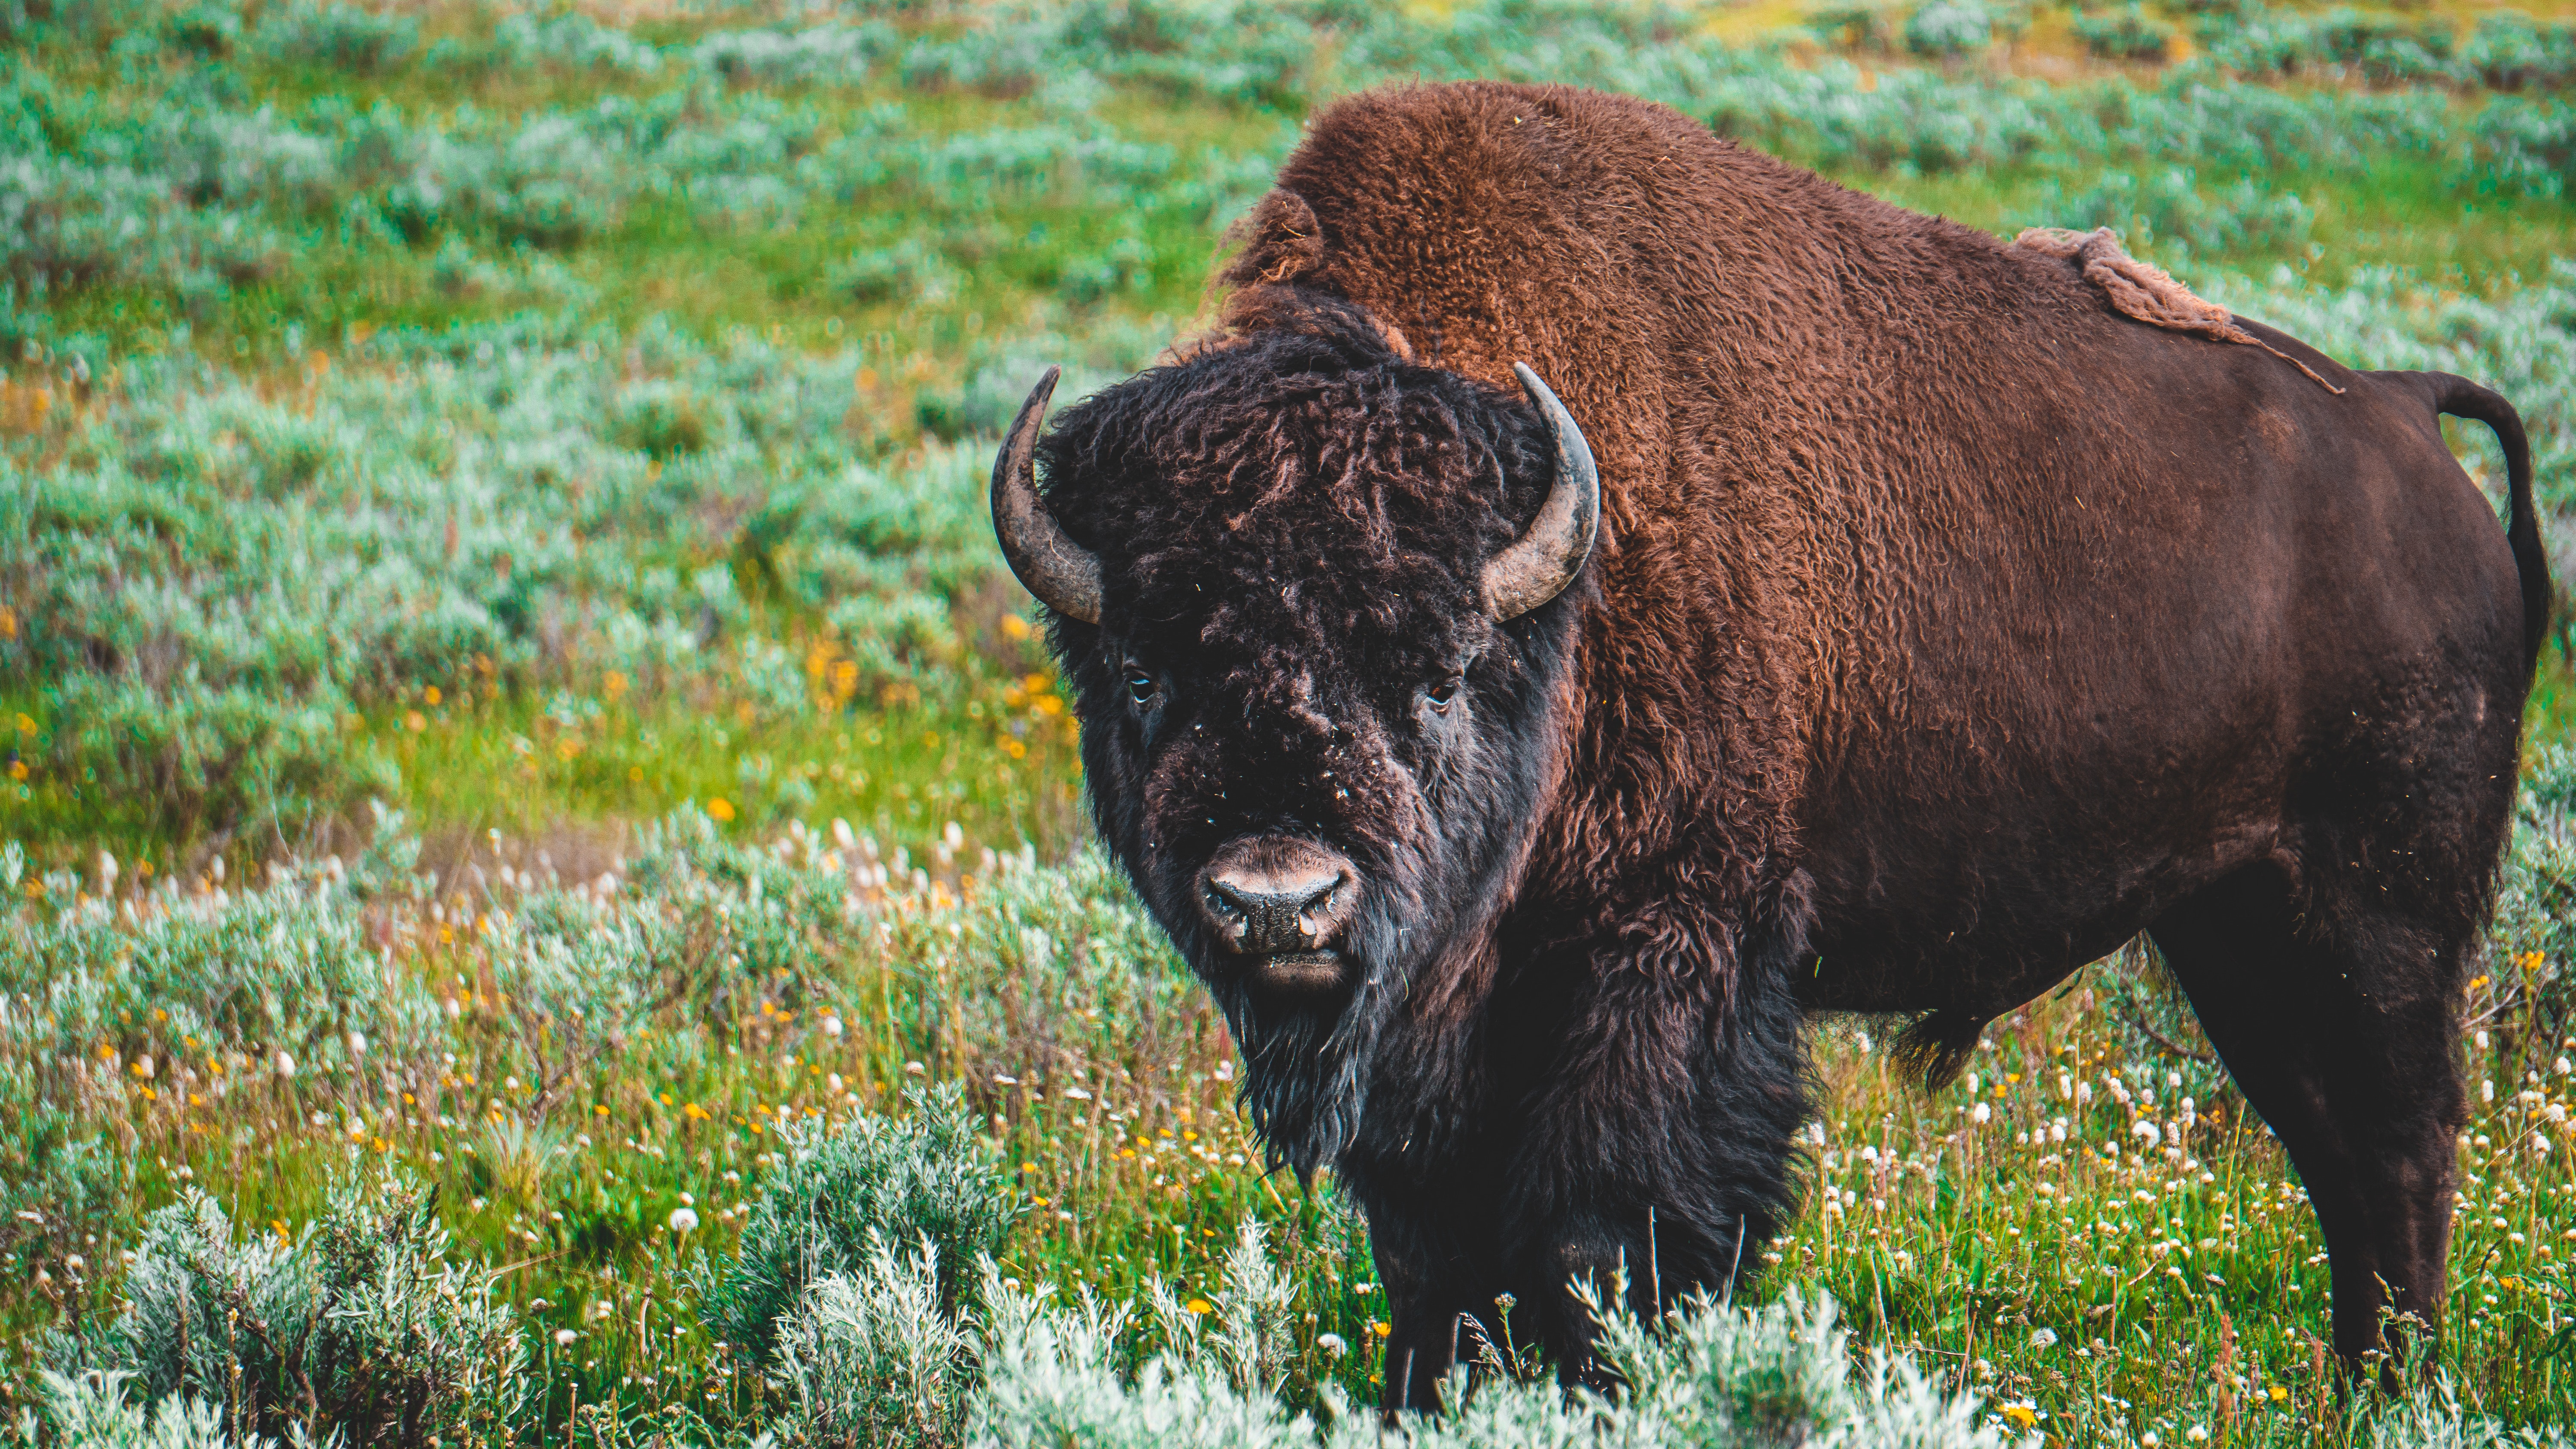 A single bison facing the camera, in a forb-dominated prairie